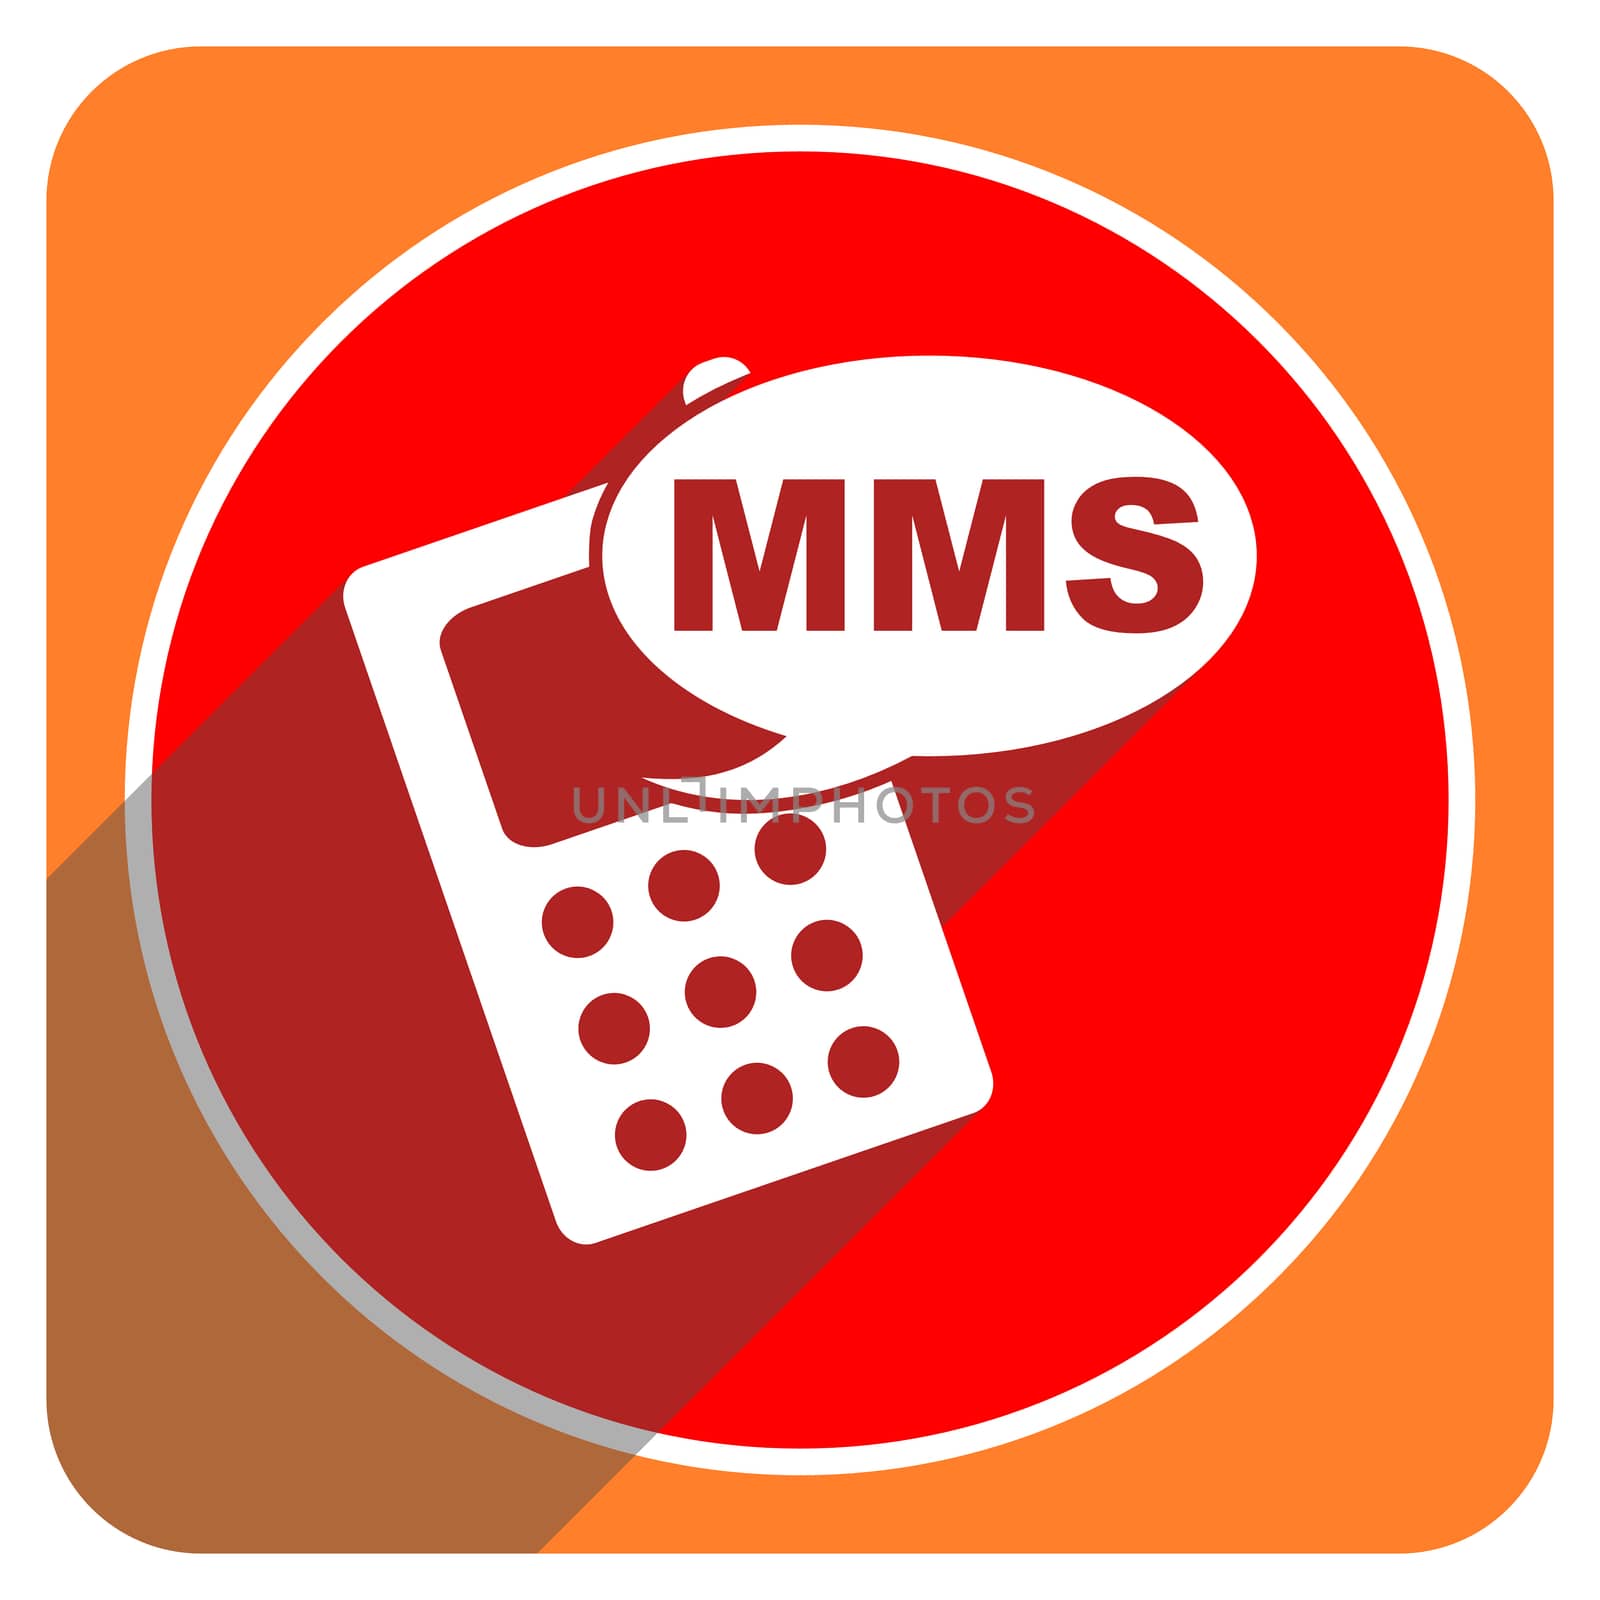 mms red flat icon isolated